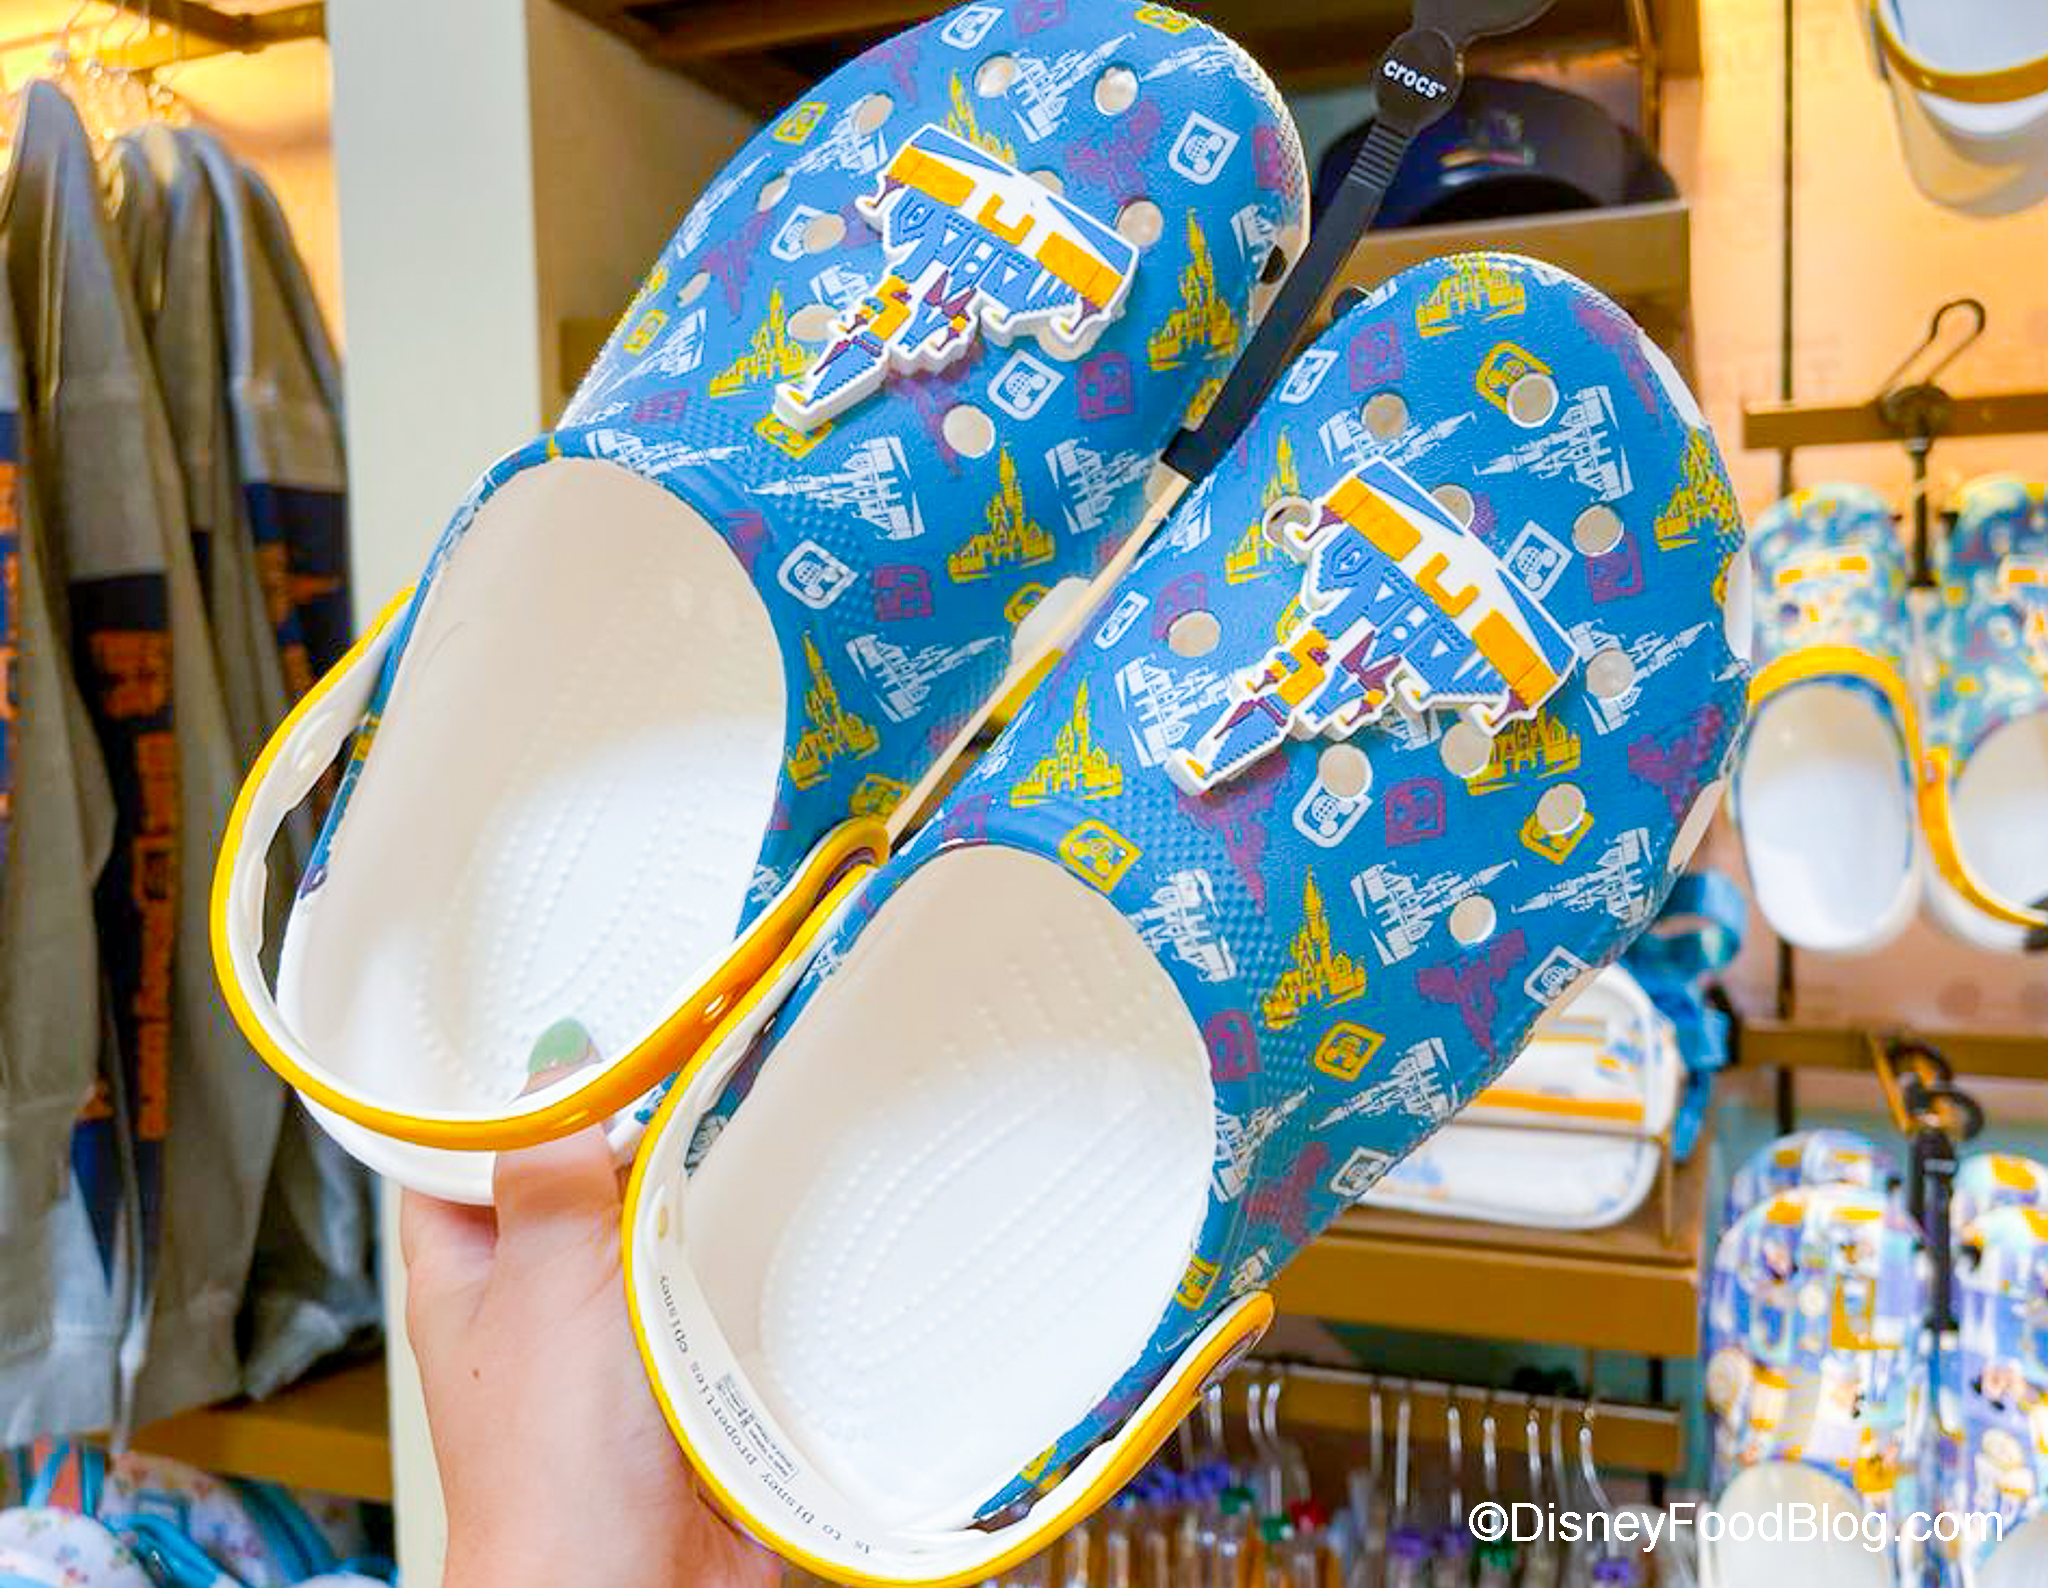 Get Disney's Cinderella Castle CROCS Online Now Before They Sell